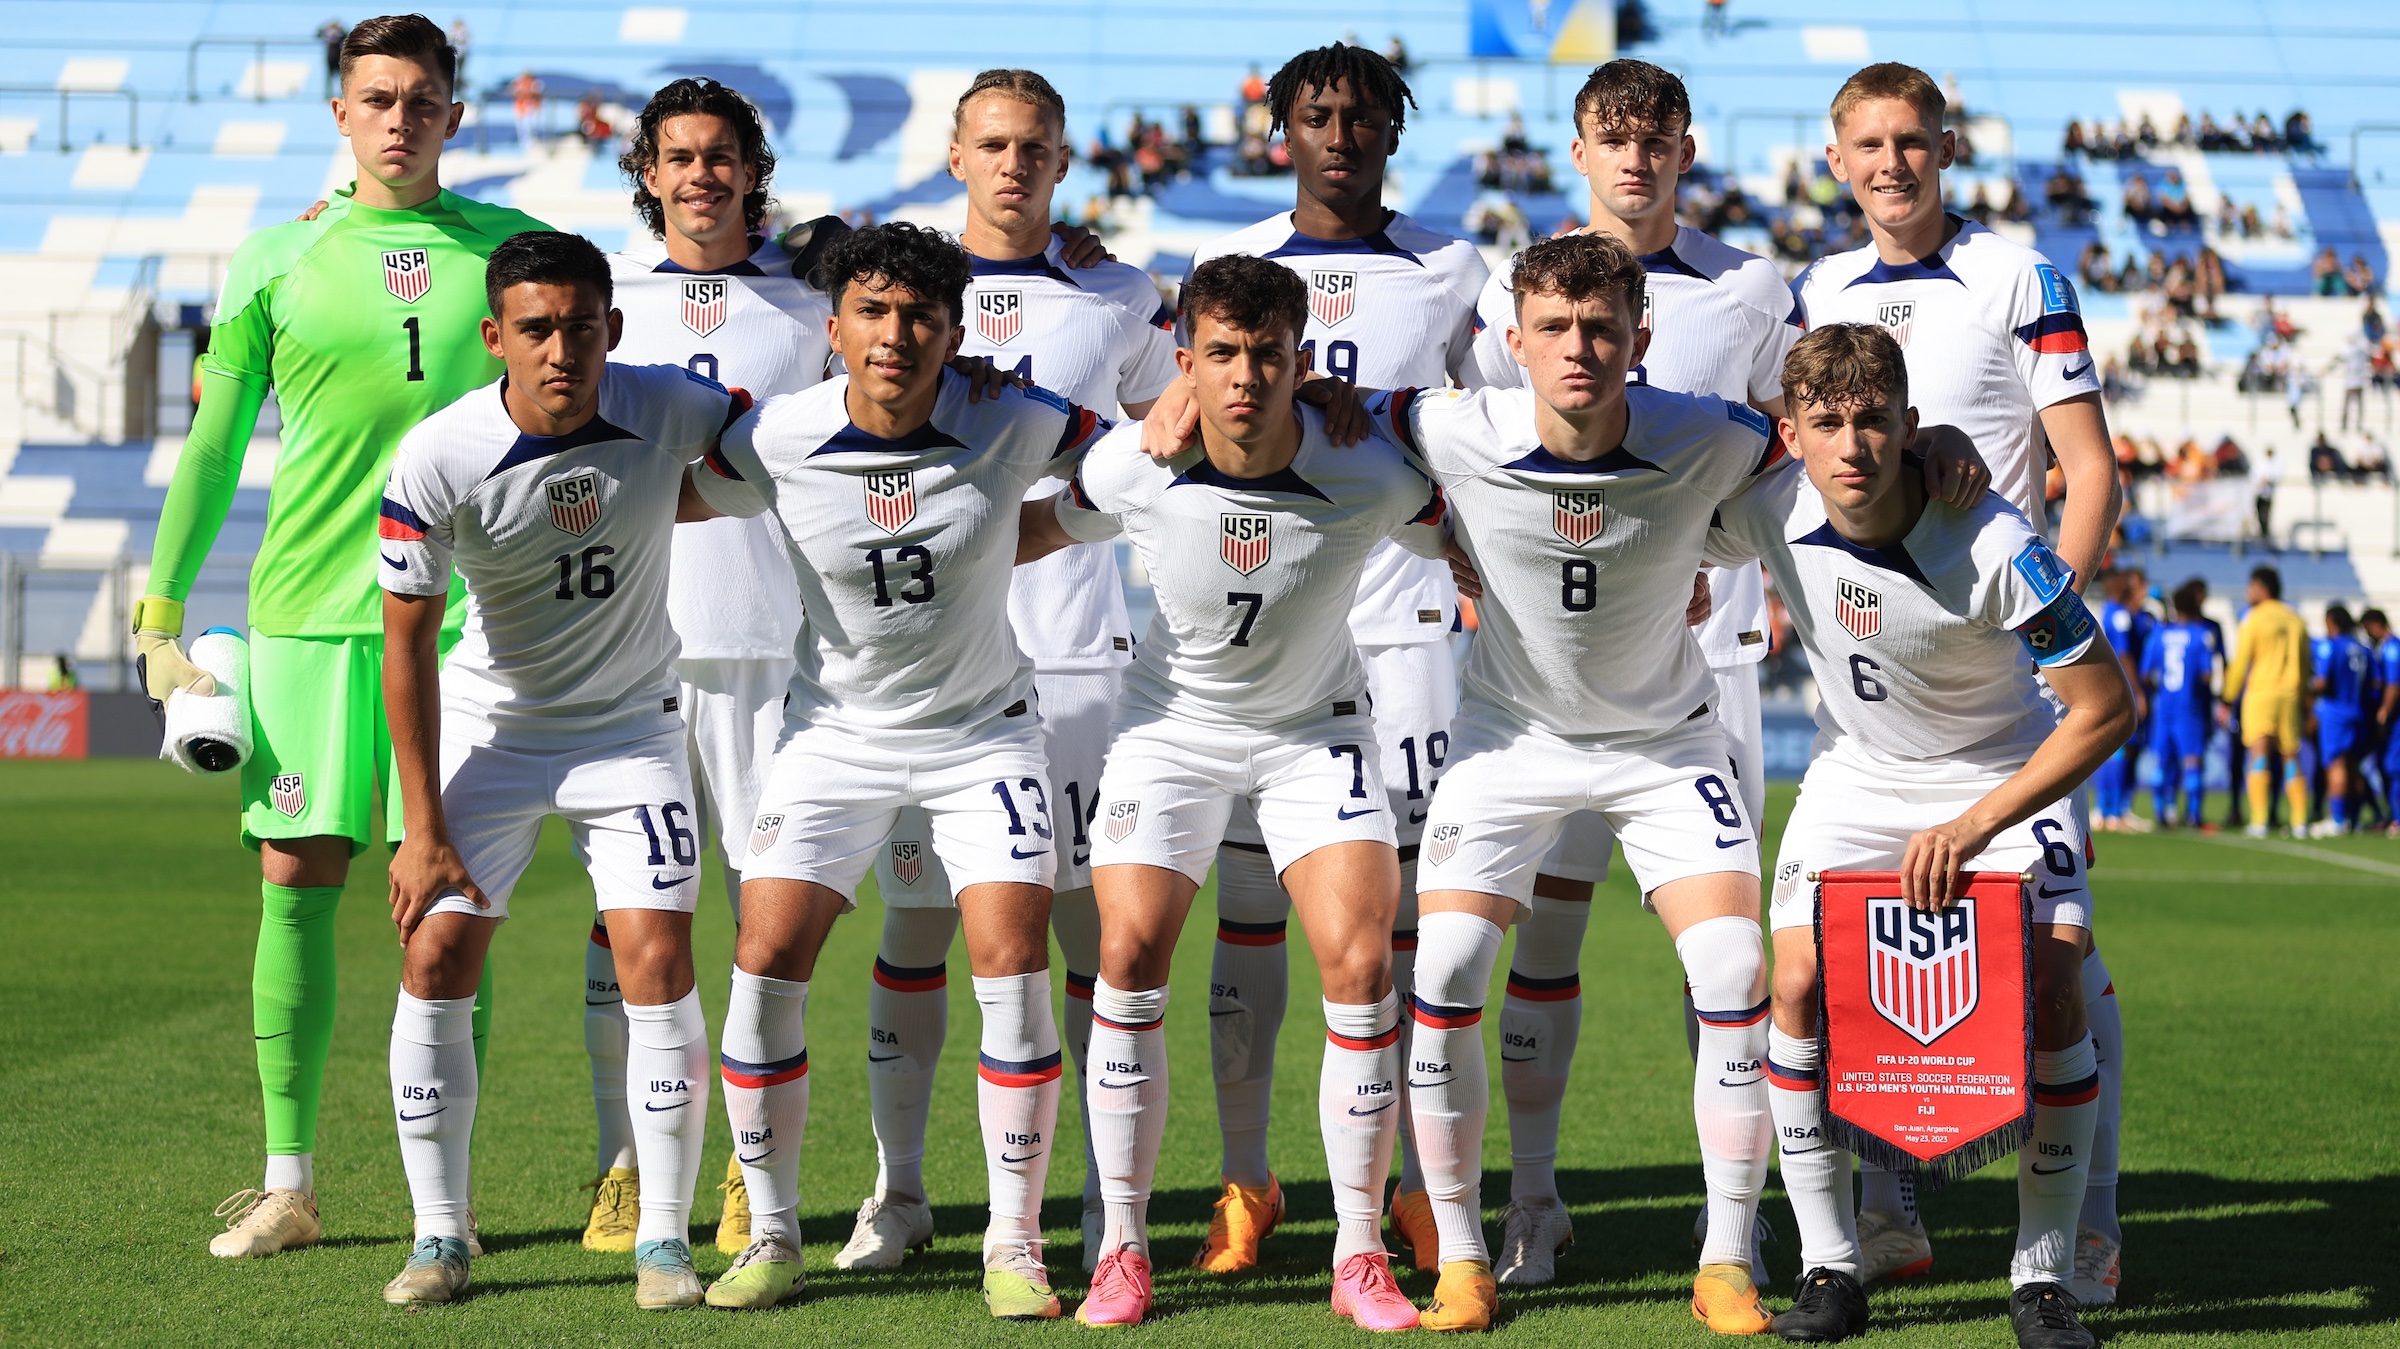 USA earns 3-0 victory over Fiji in FIFA U-20 World Cup group stage